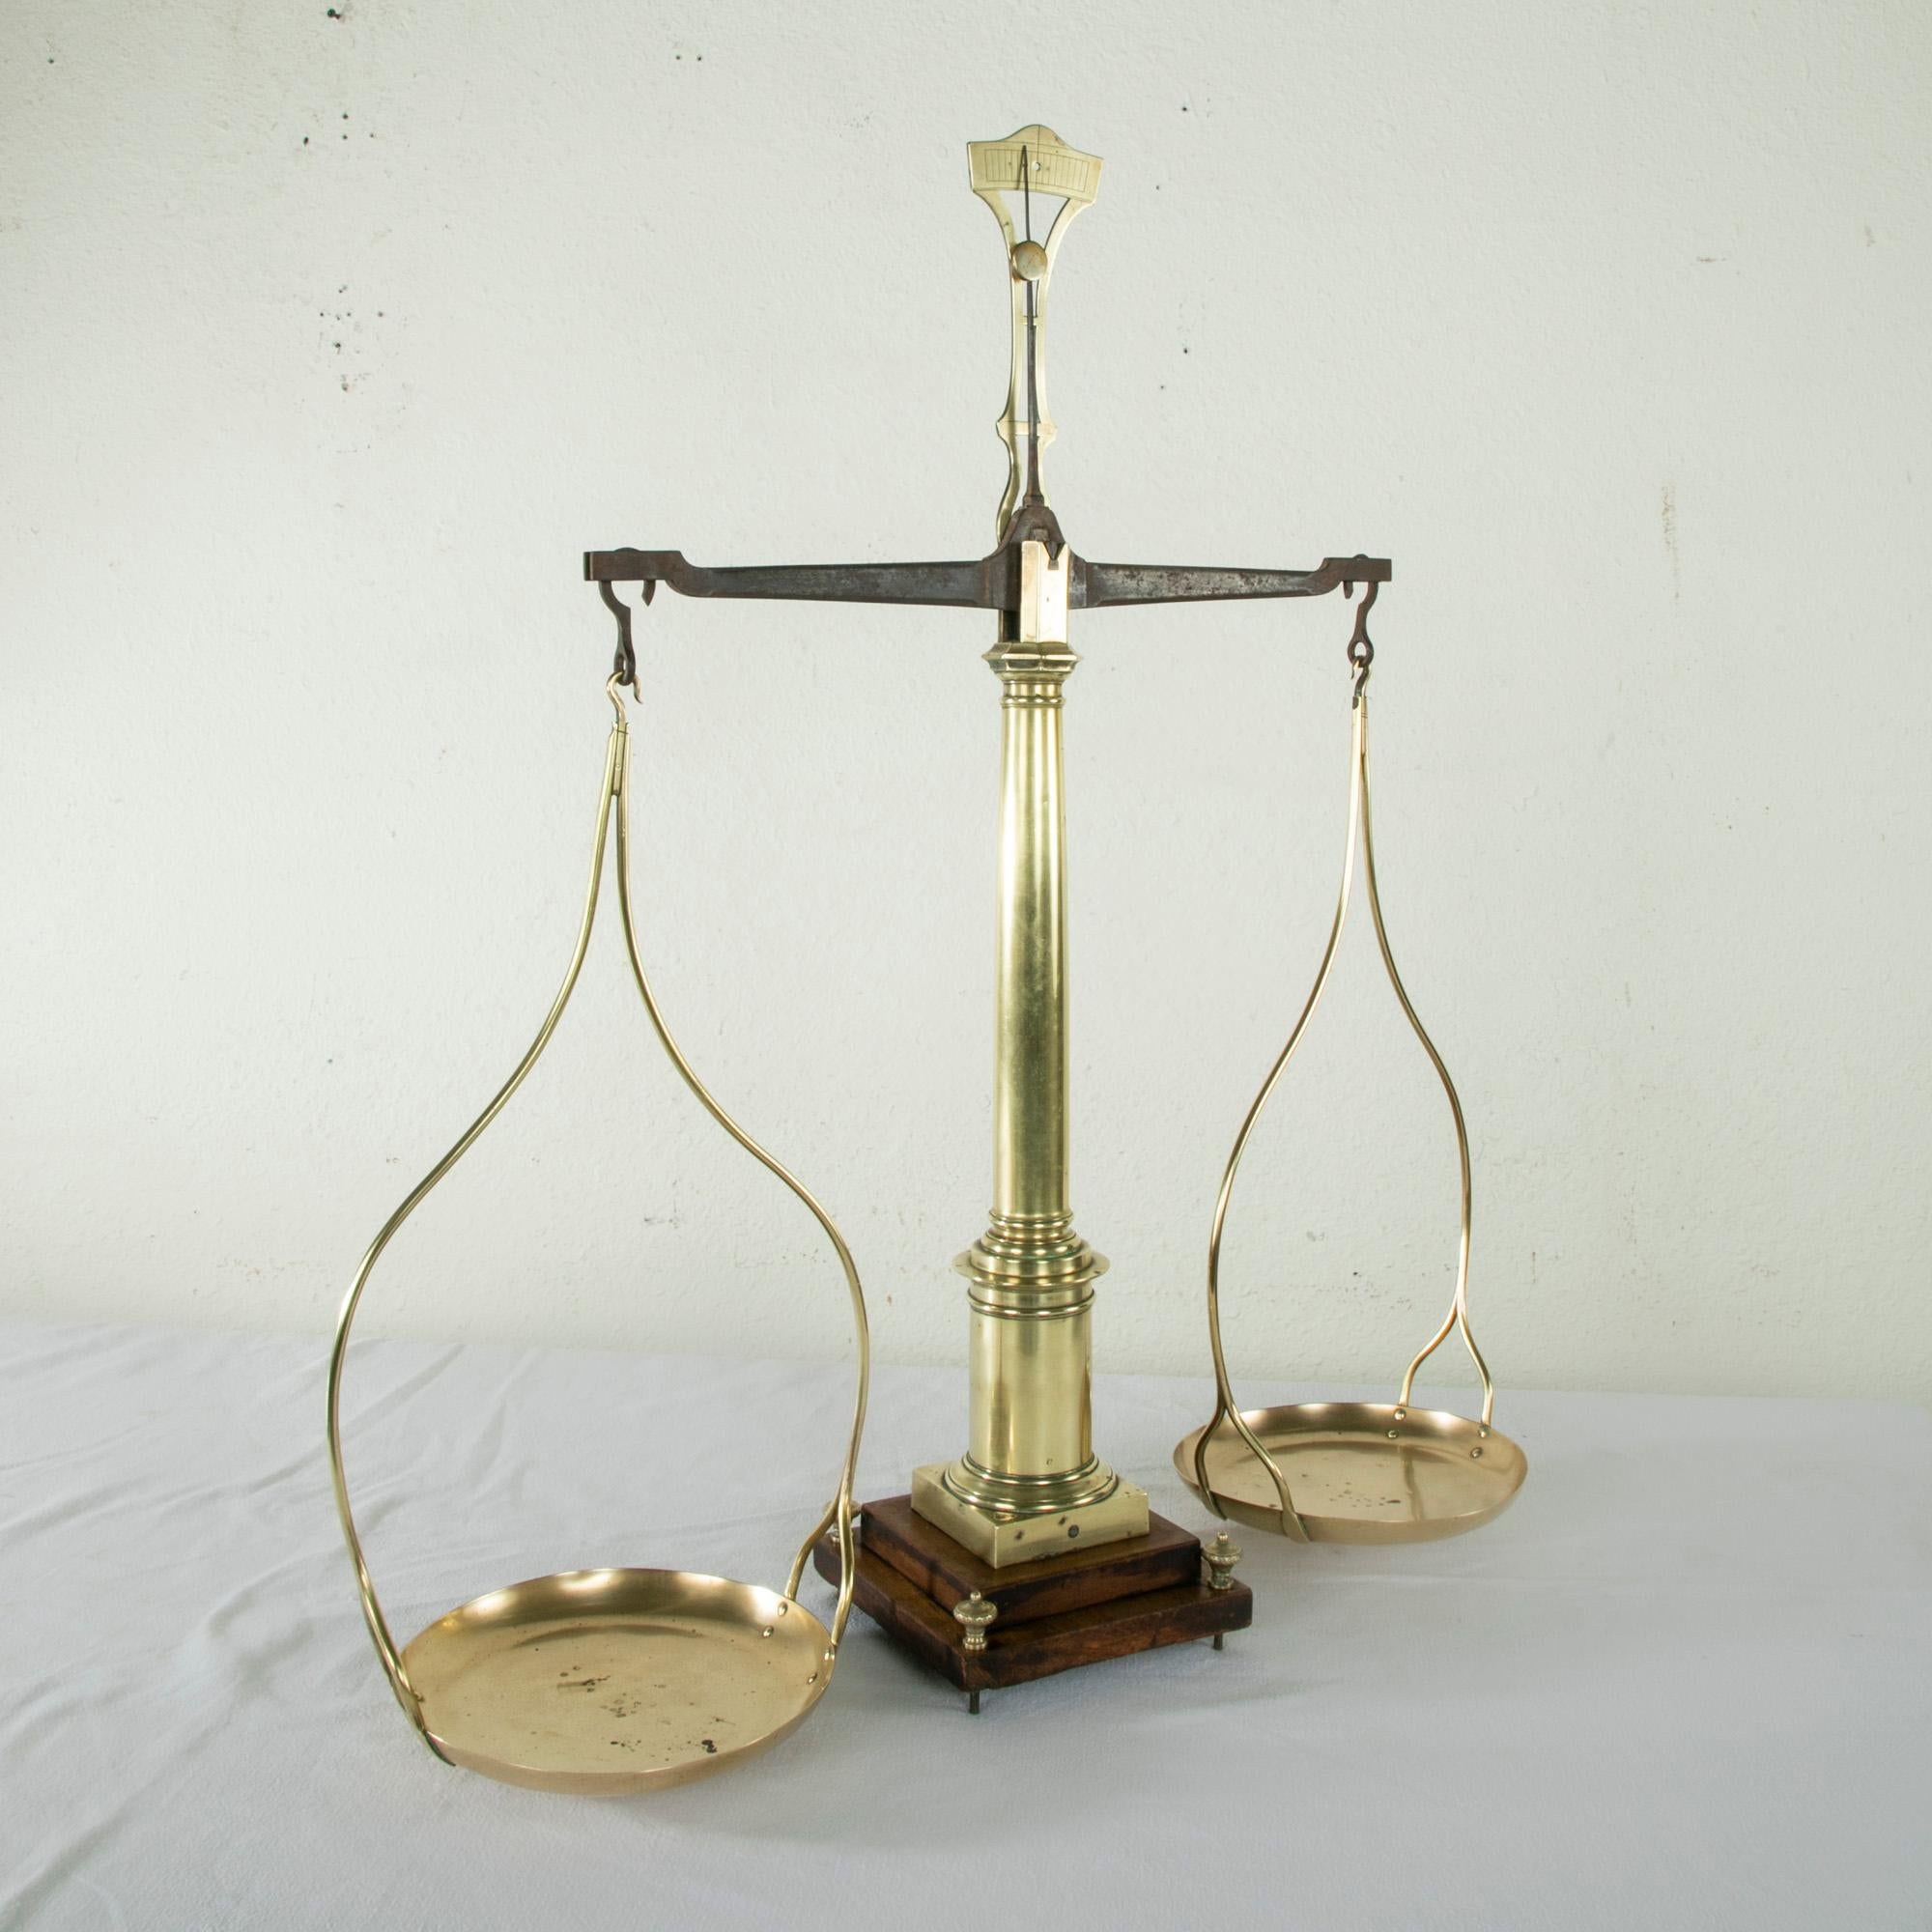 Standing at 31 inches in height, this set of large early 19th century French brass scales features two hanging brass pans that hang from an iron balance arm. The brass pans bear multiple stamps made by the French government to certify accuracy. The